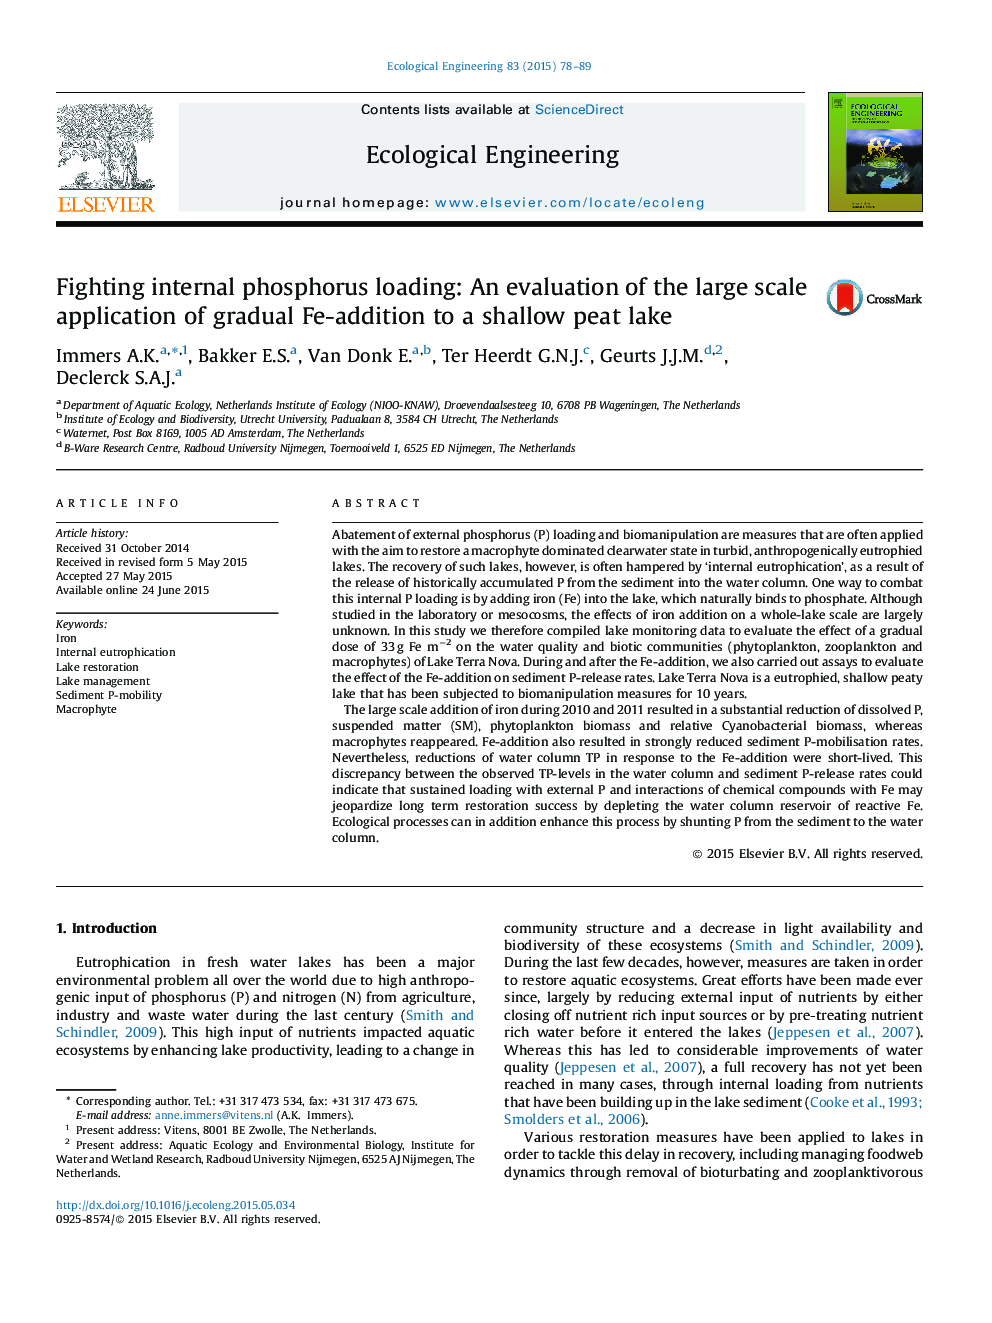 Fighting internal phosphorus loading: An evaluation of the large scale application of gradual Fe-addition to a shallow peat lake